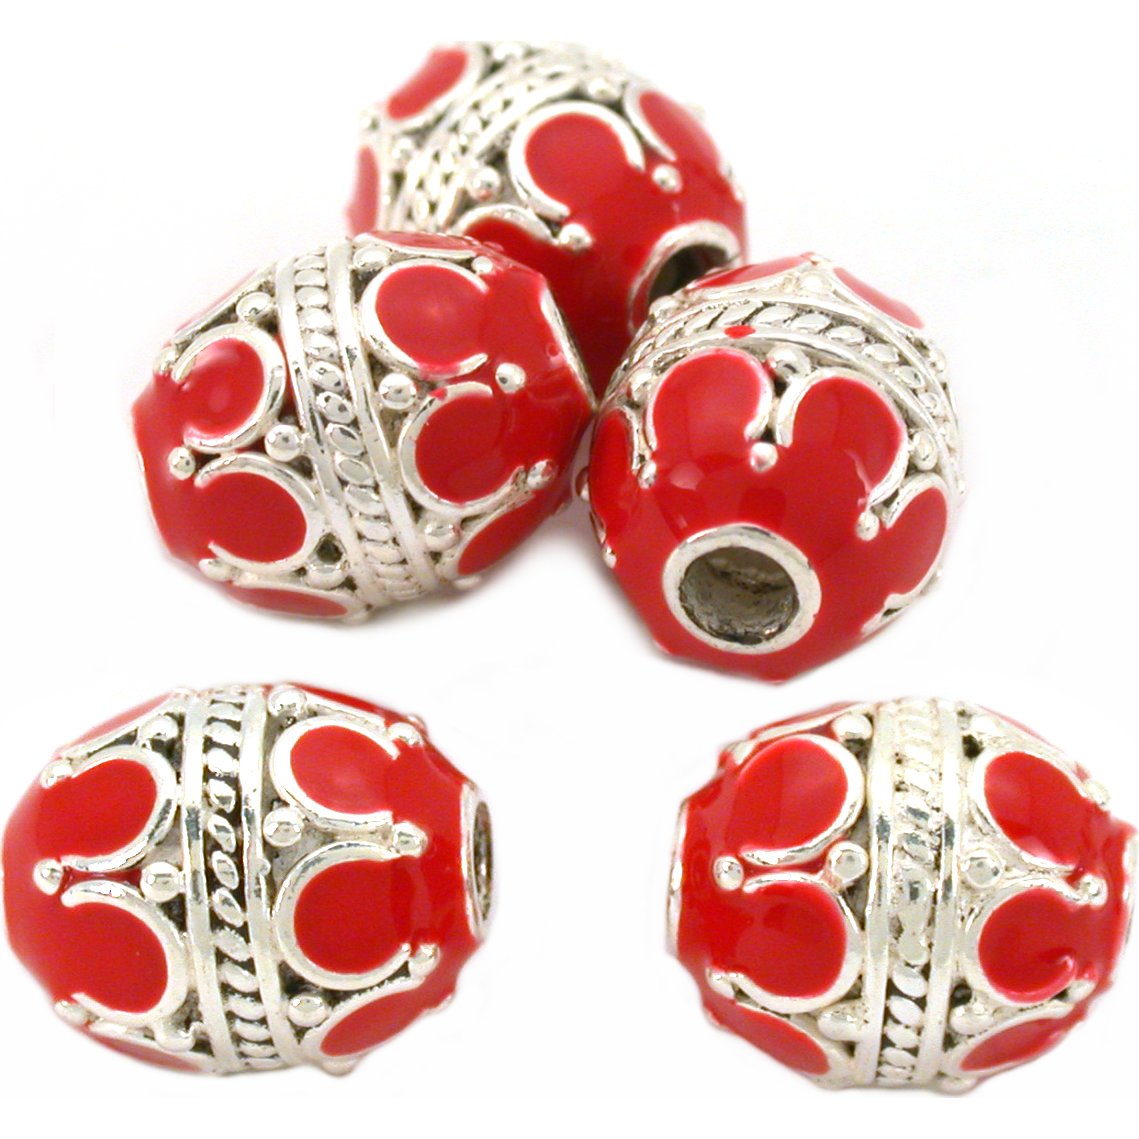 Oval Sterling Silver Beads Red Enamel 8.5mm 5Pcs Approx.